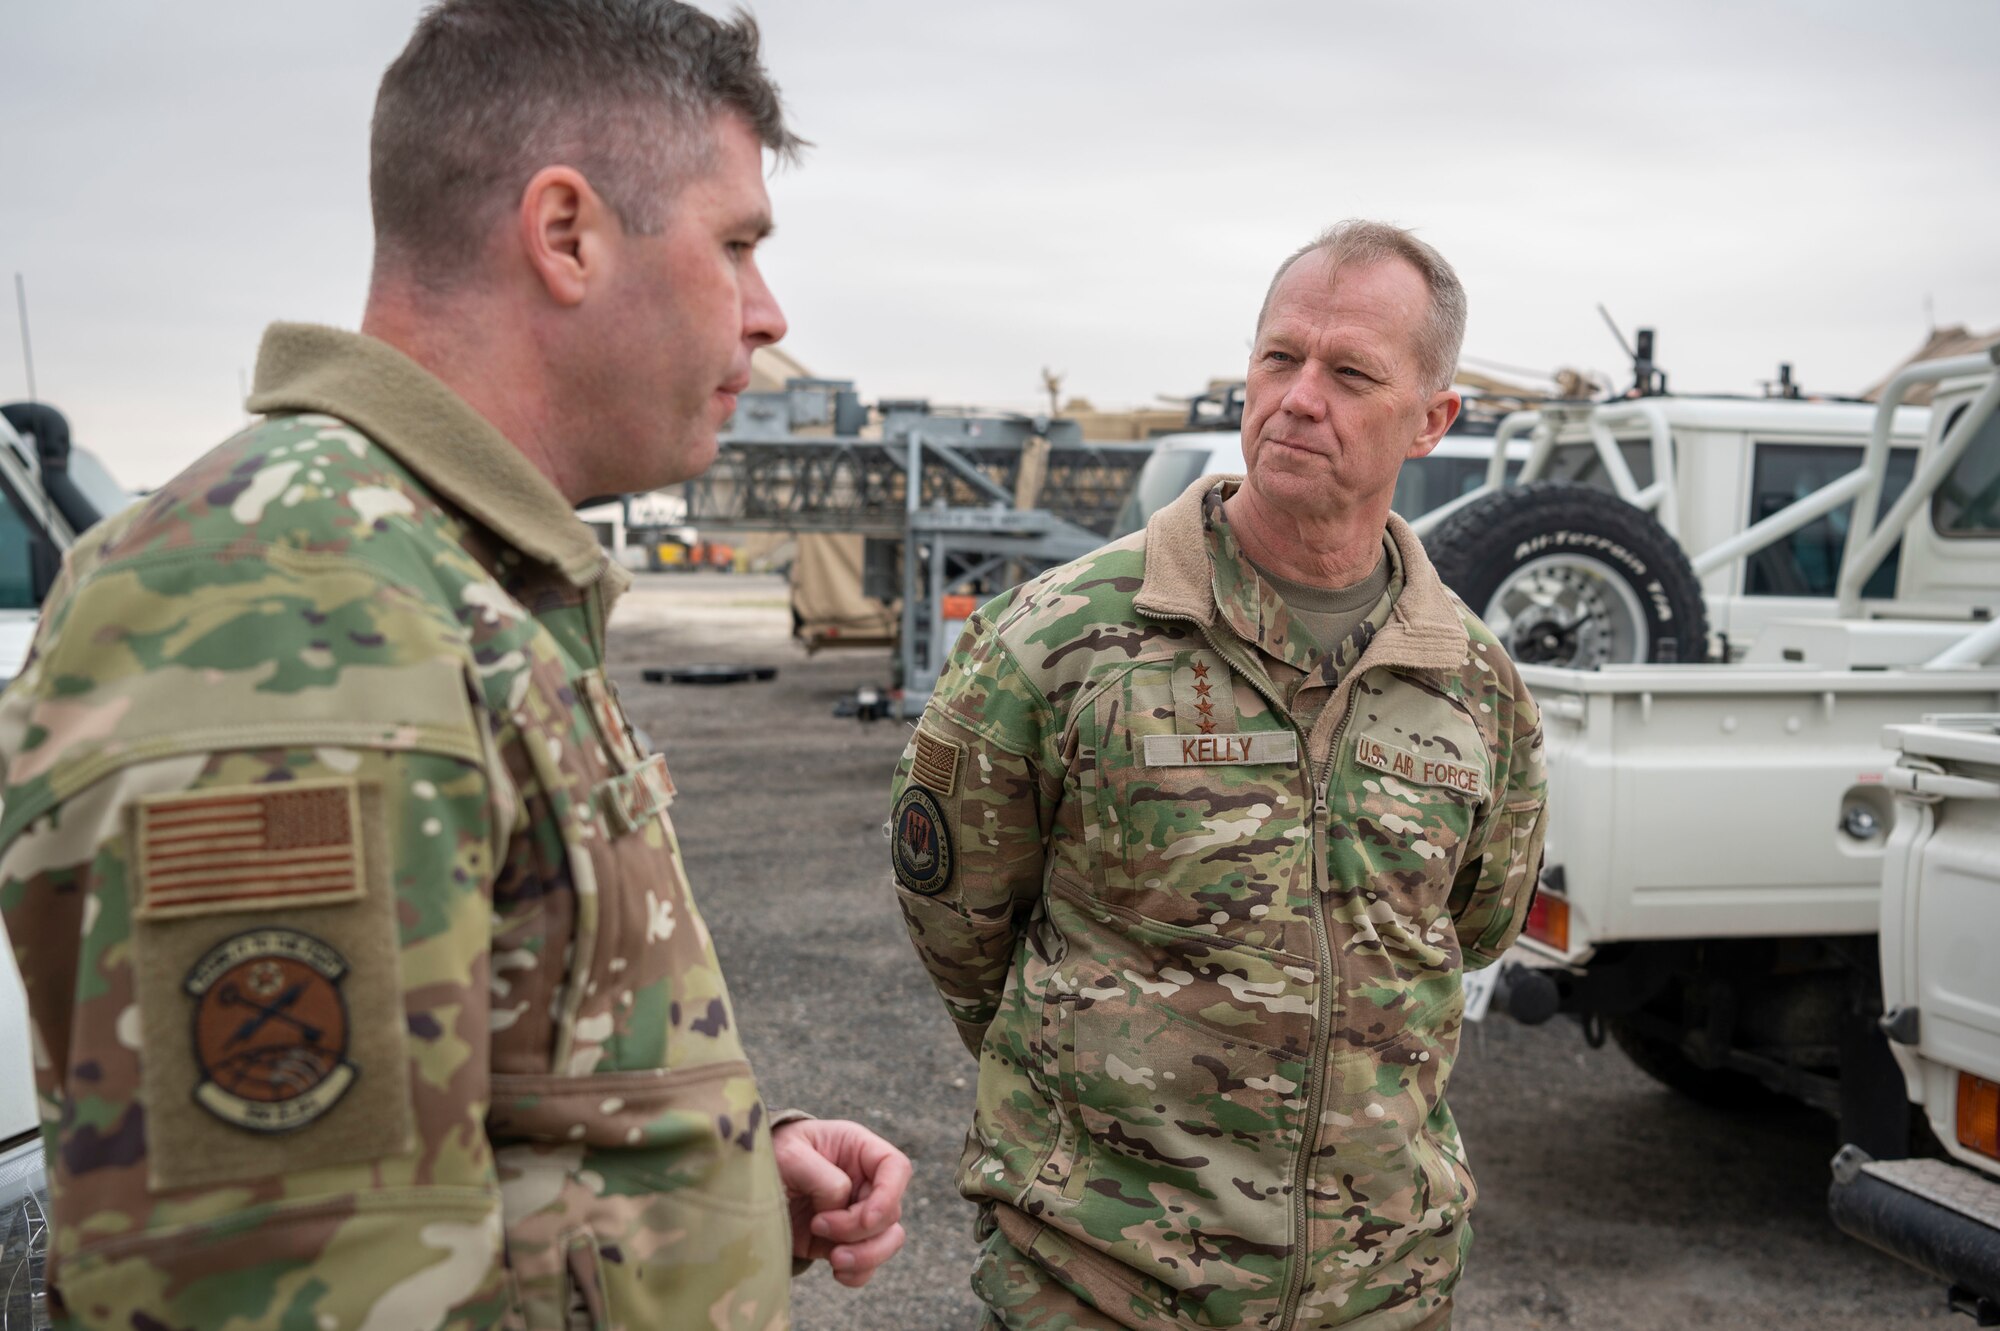 U.S. Air Force Gen. Mark Kelly, commander of Air Combat Command, learns about the cargo yard from Maj. Shawn Cameron, 386th Expeditionary Logistics Readiness Squadron commander, during a tour at Ali Al Salem Air Base, Kuwait, Feb. 15, 2023.